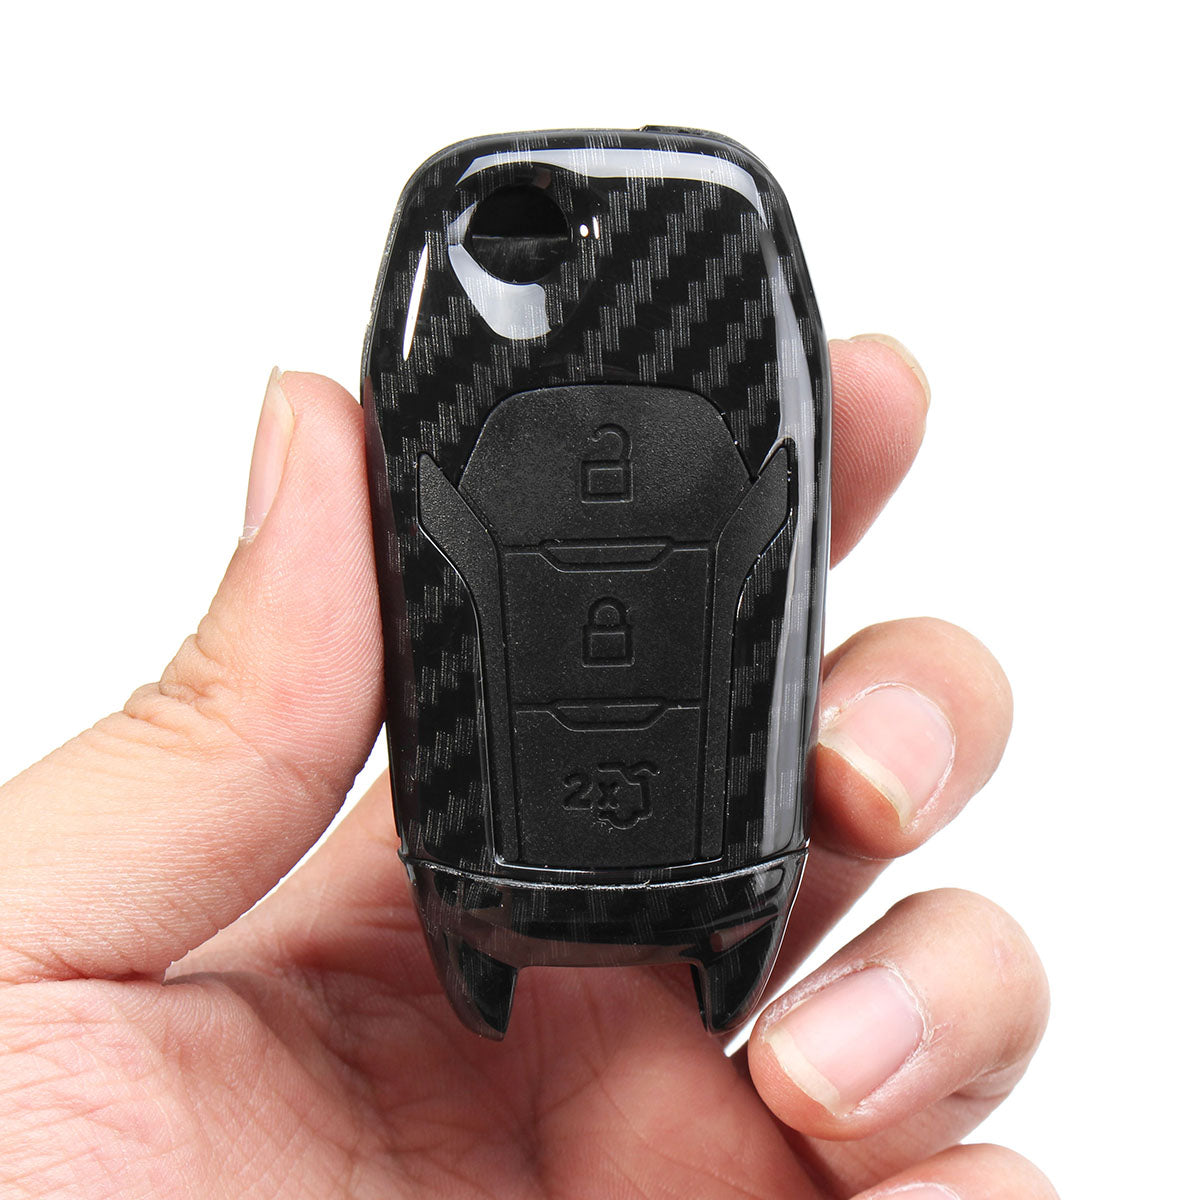 Plastic and Rubber Car Key Case Bag Protector Cover Remote Control Fob for Ford F-150 F-250 F-350 Explorer Ranger - Auto GoShop